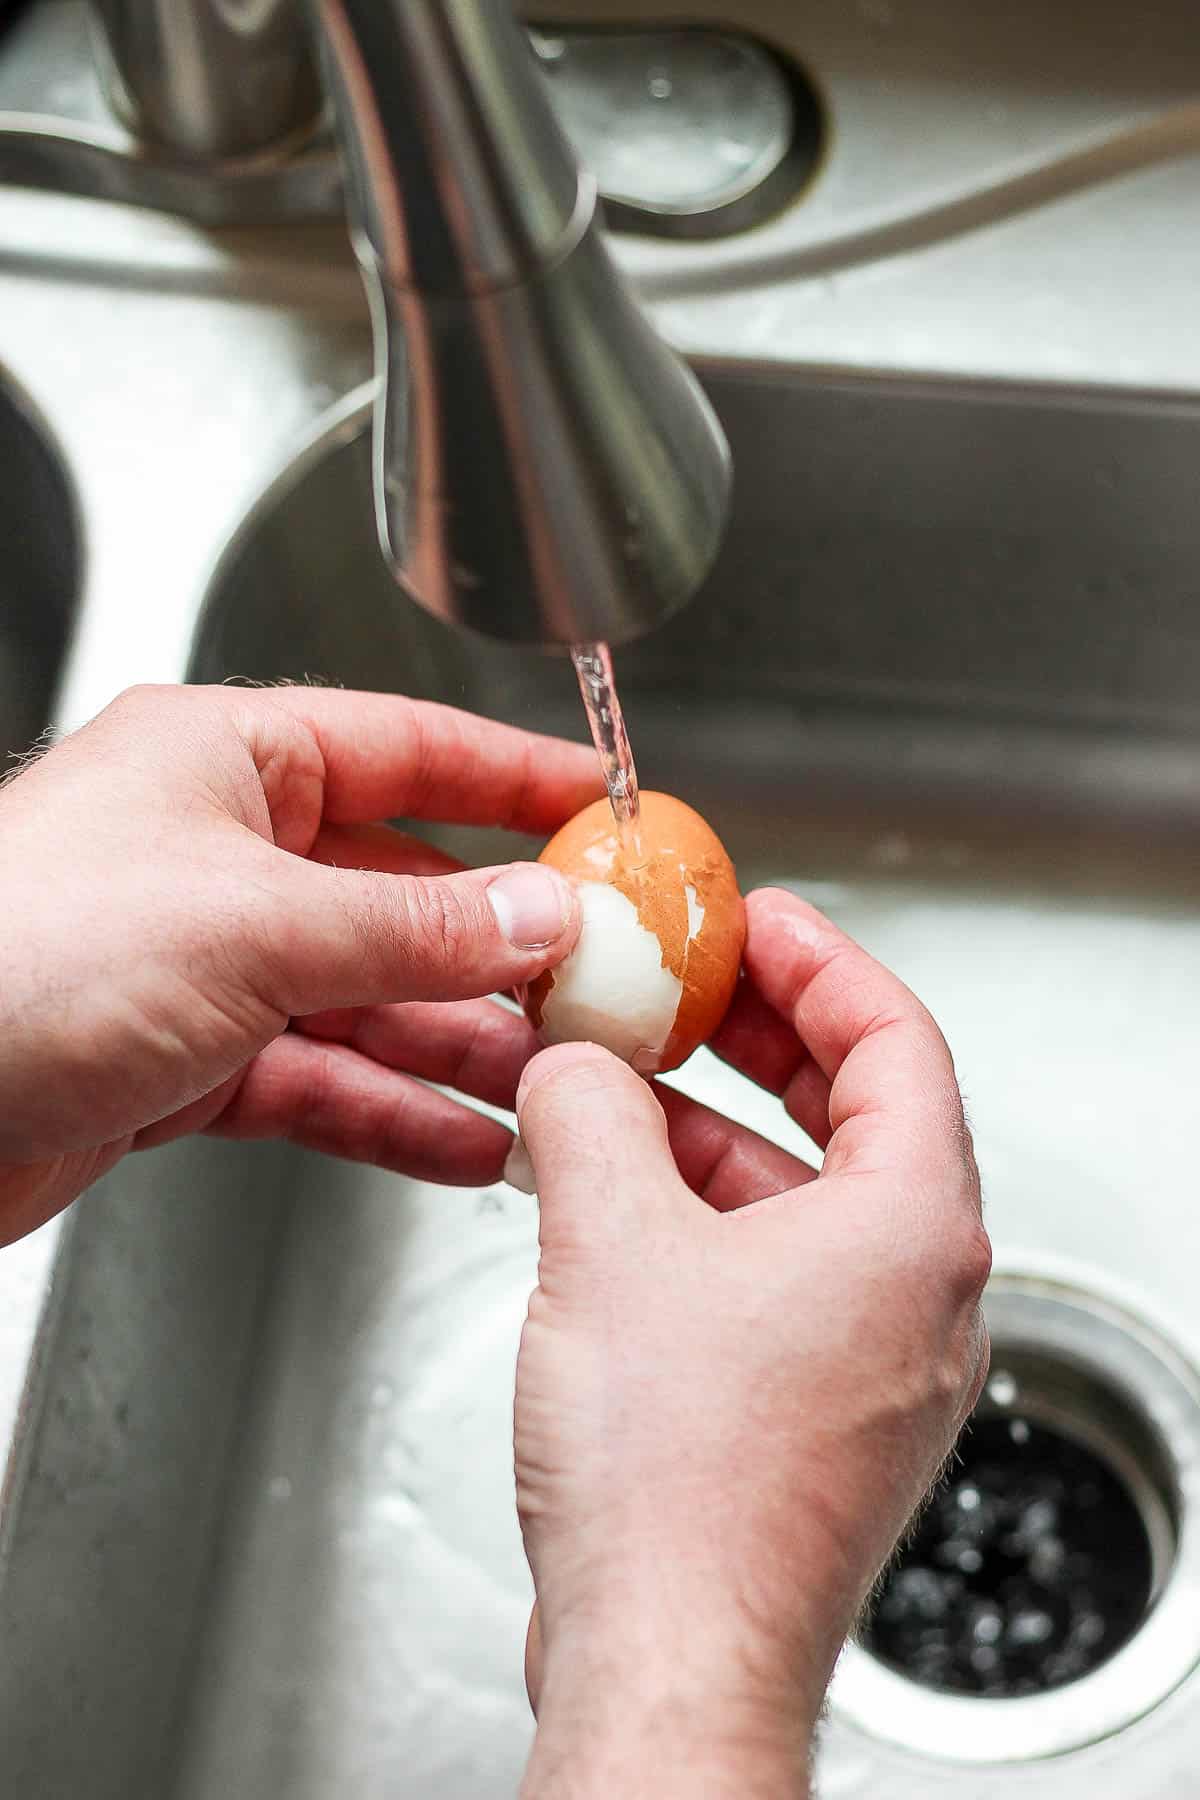 A hard boiled egg being peeled under running water.